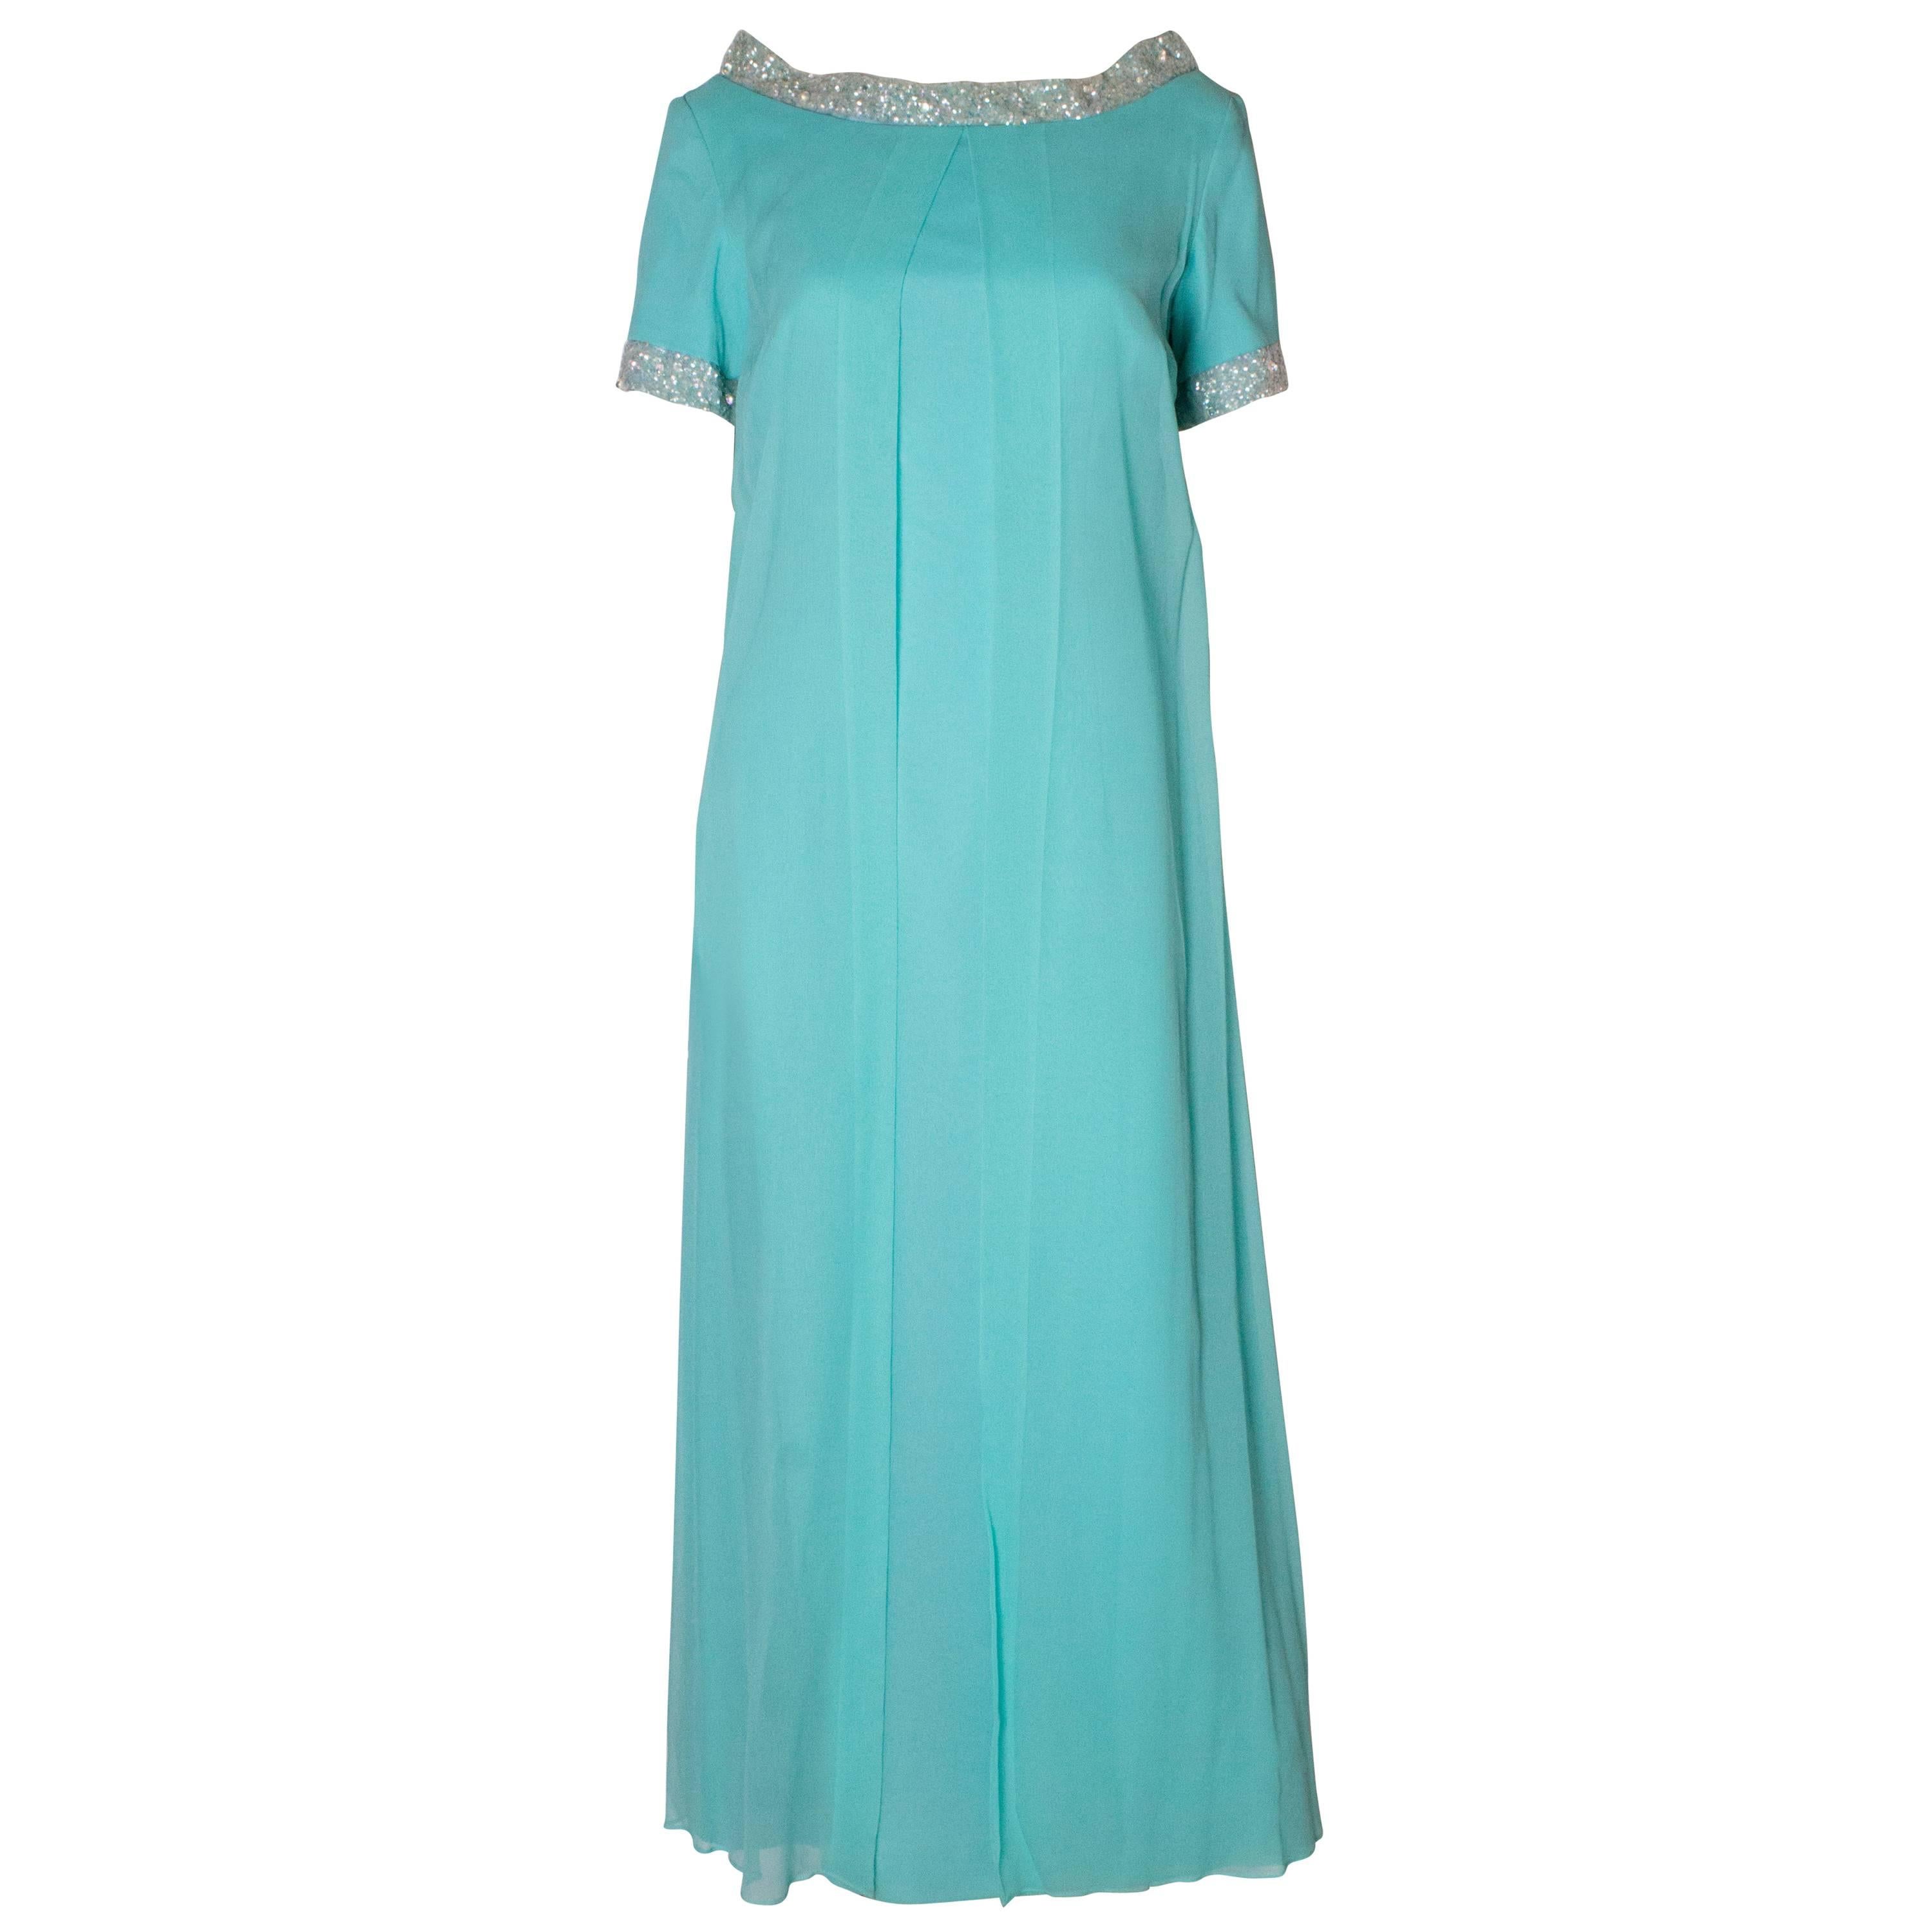 A Vintage 1960s pale blue evening gown by Polmarks Models